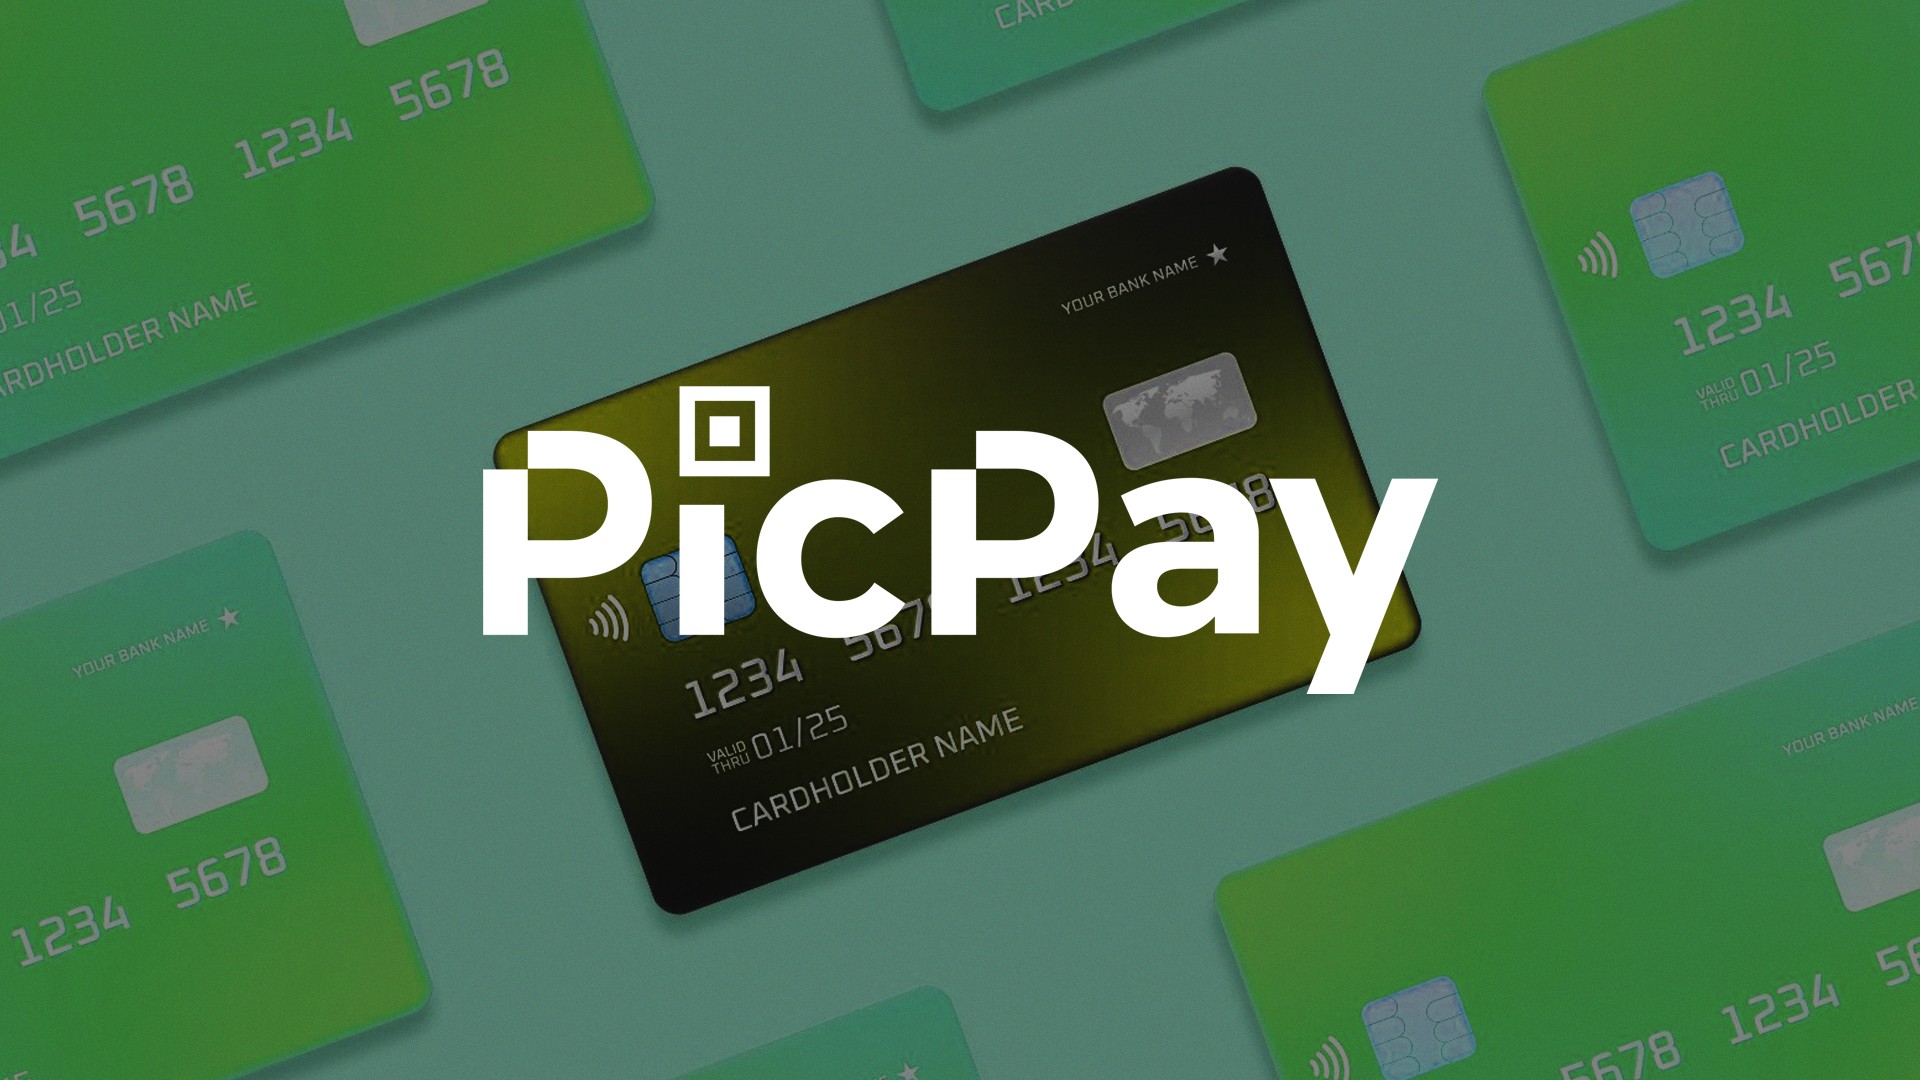 More than two million PicPay users have issued a credit card with a limit tied to their balance